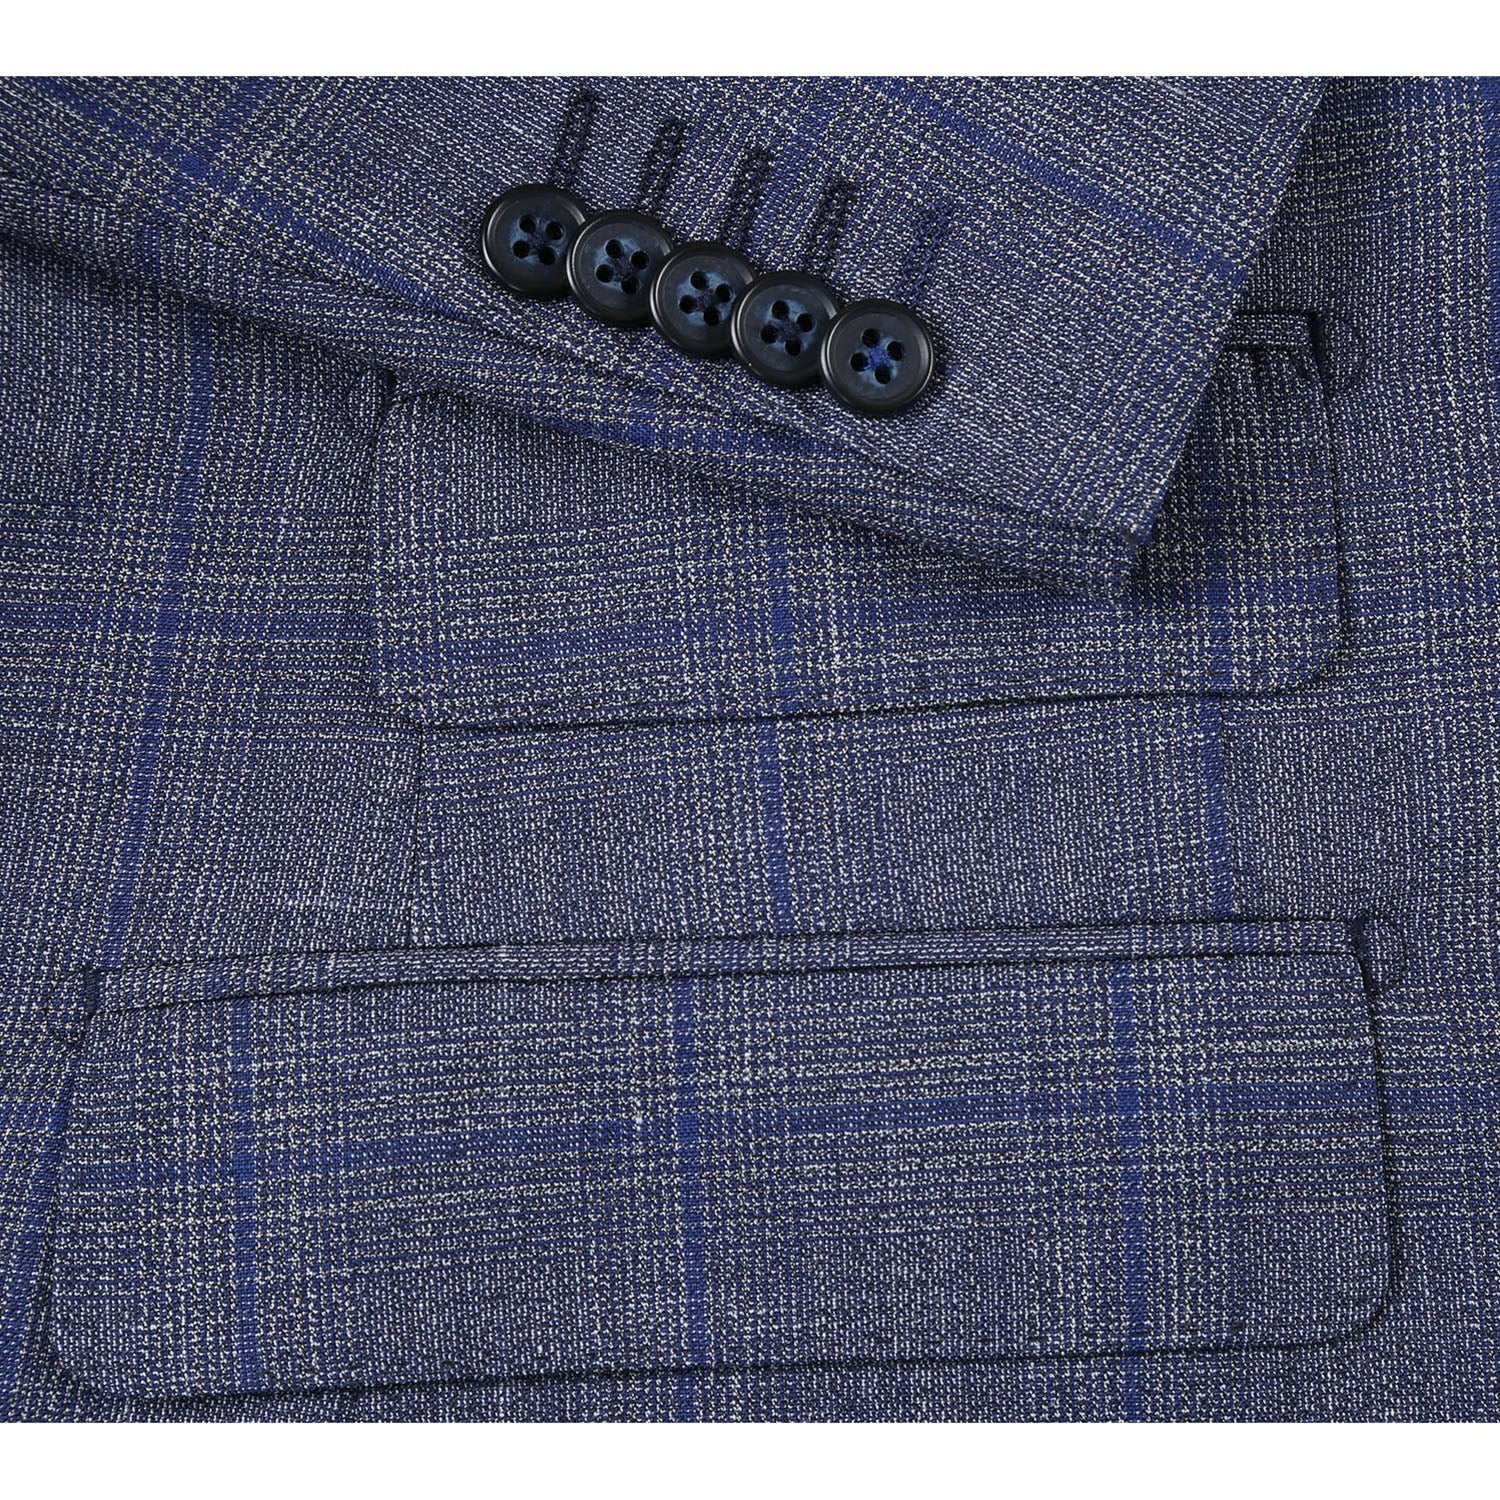 Wool, Silk, and Linen Double Breasted SLIM FIT Suit in Grey and Blue Windowpane Check (Short, Regular, and Long Available) by English Laundry